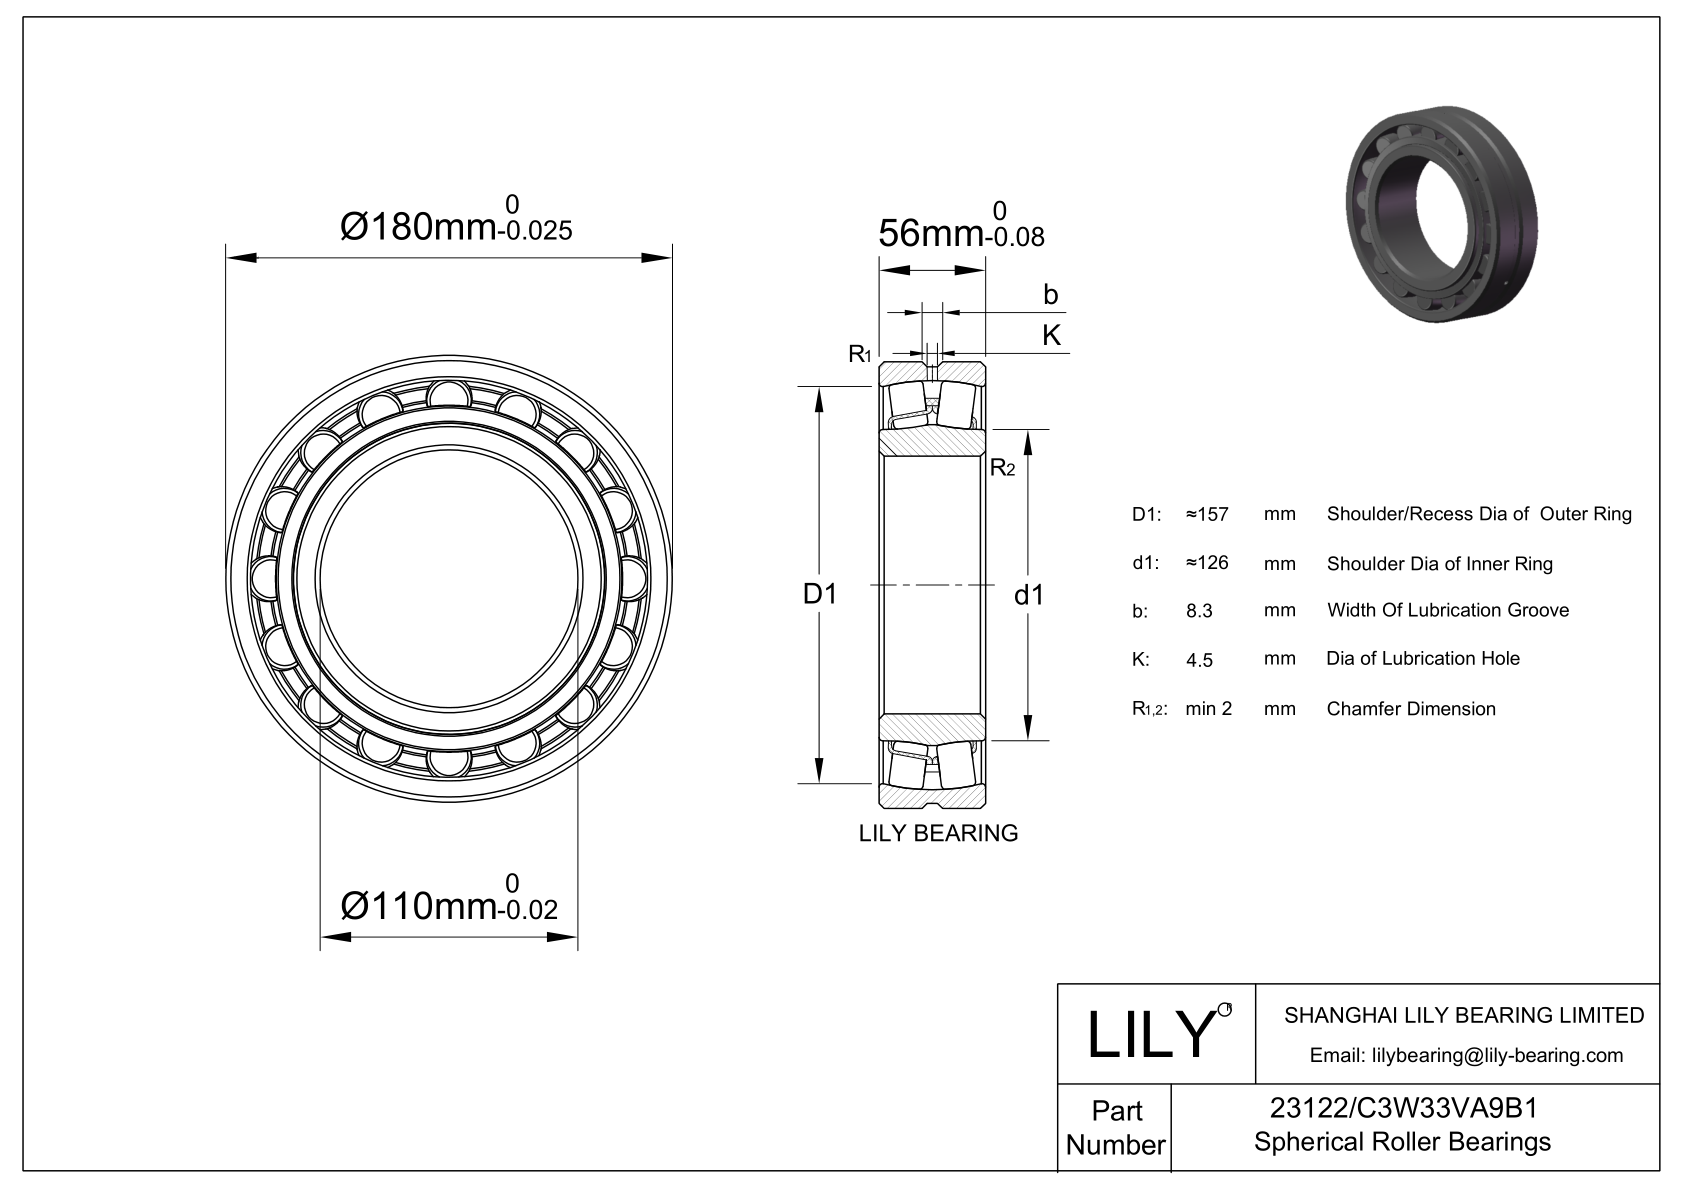 23122/C3W33VA9B1 Double Row Spherical Roller Bearing cad drawing